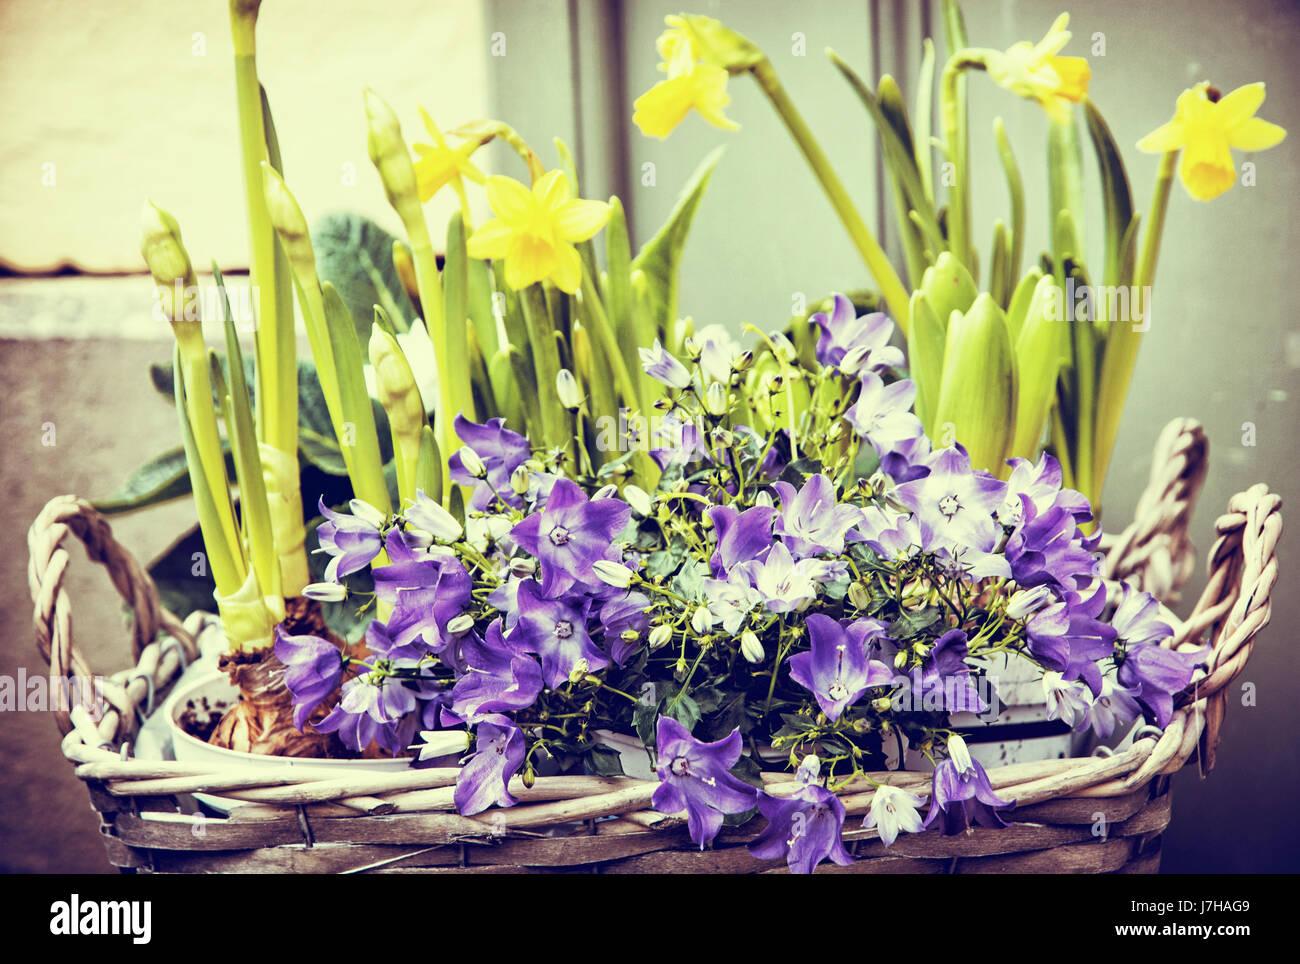 Bluebells and yellow daffodils in the wicker basket. Symbol of spring. Gardening theme. Natural decoration. Beauty photo filter. Stock Photo